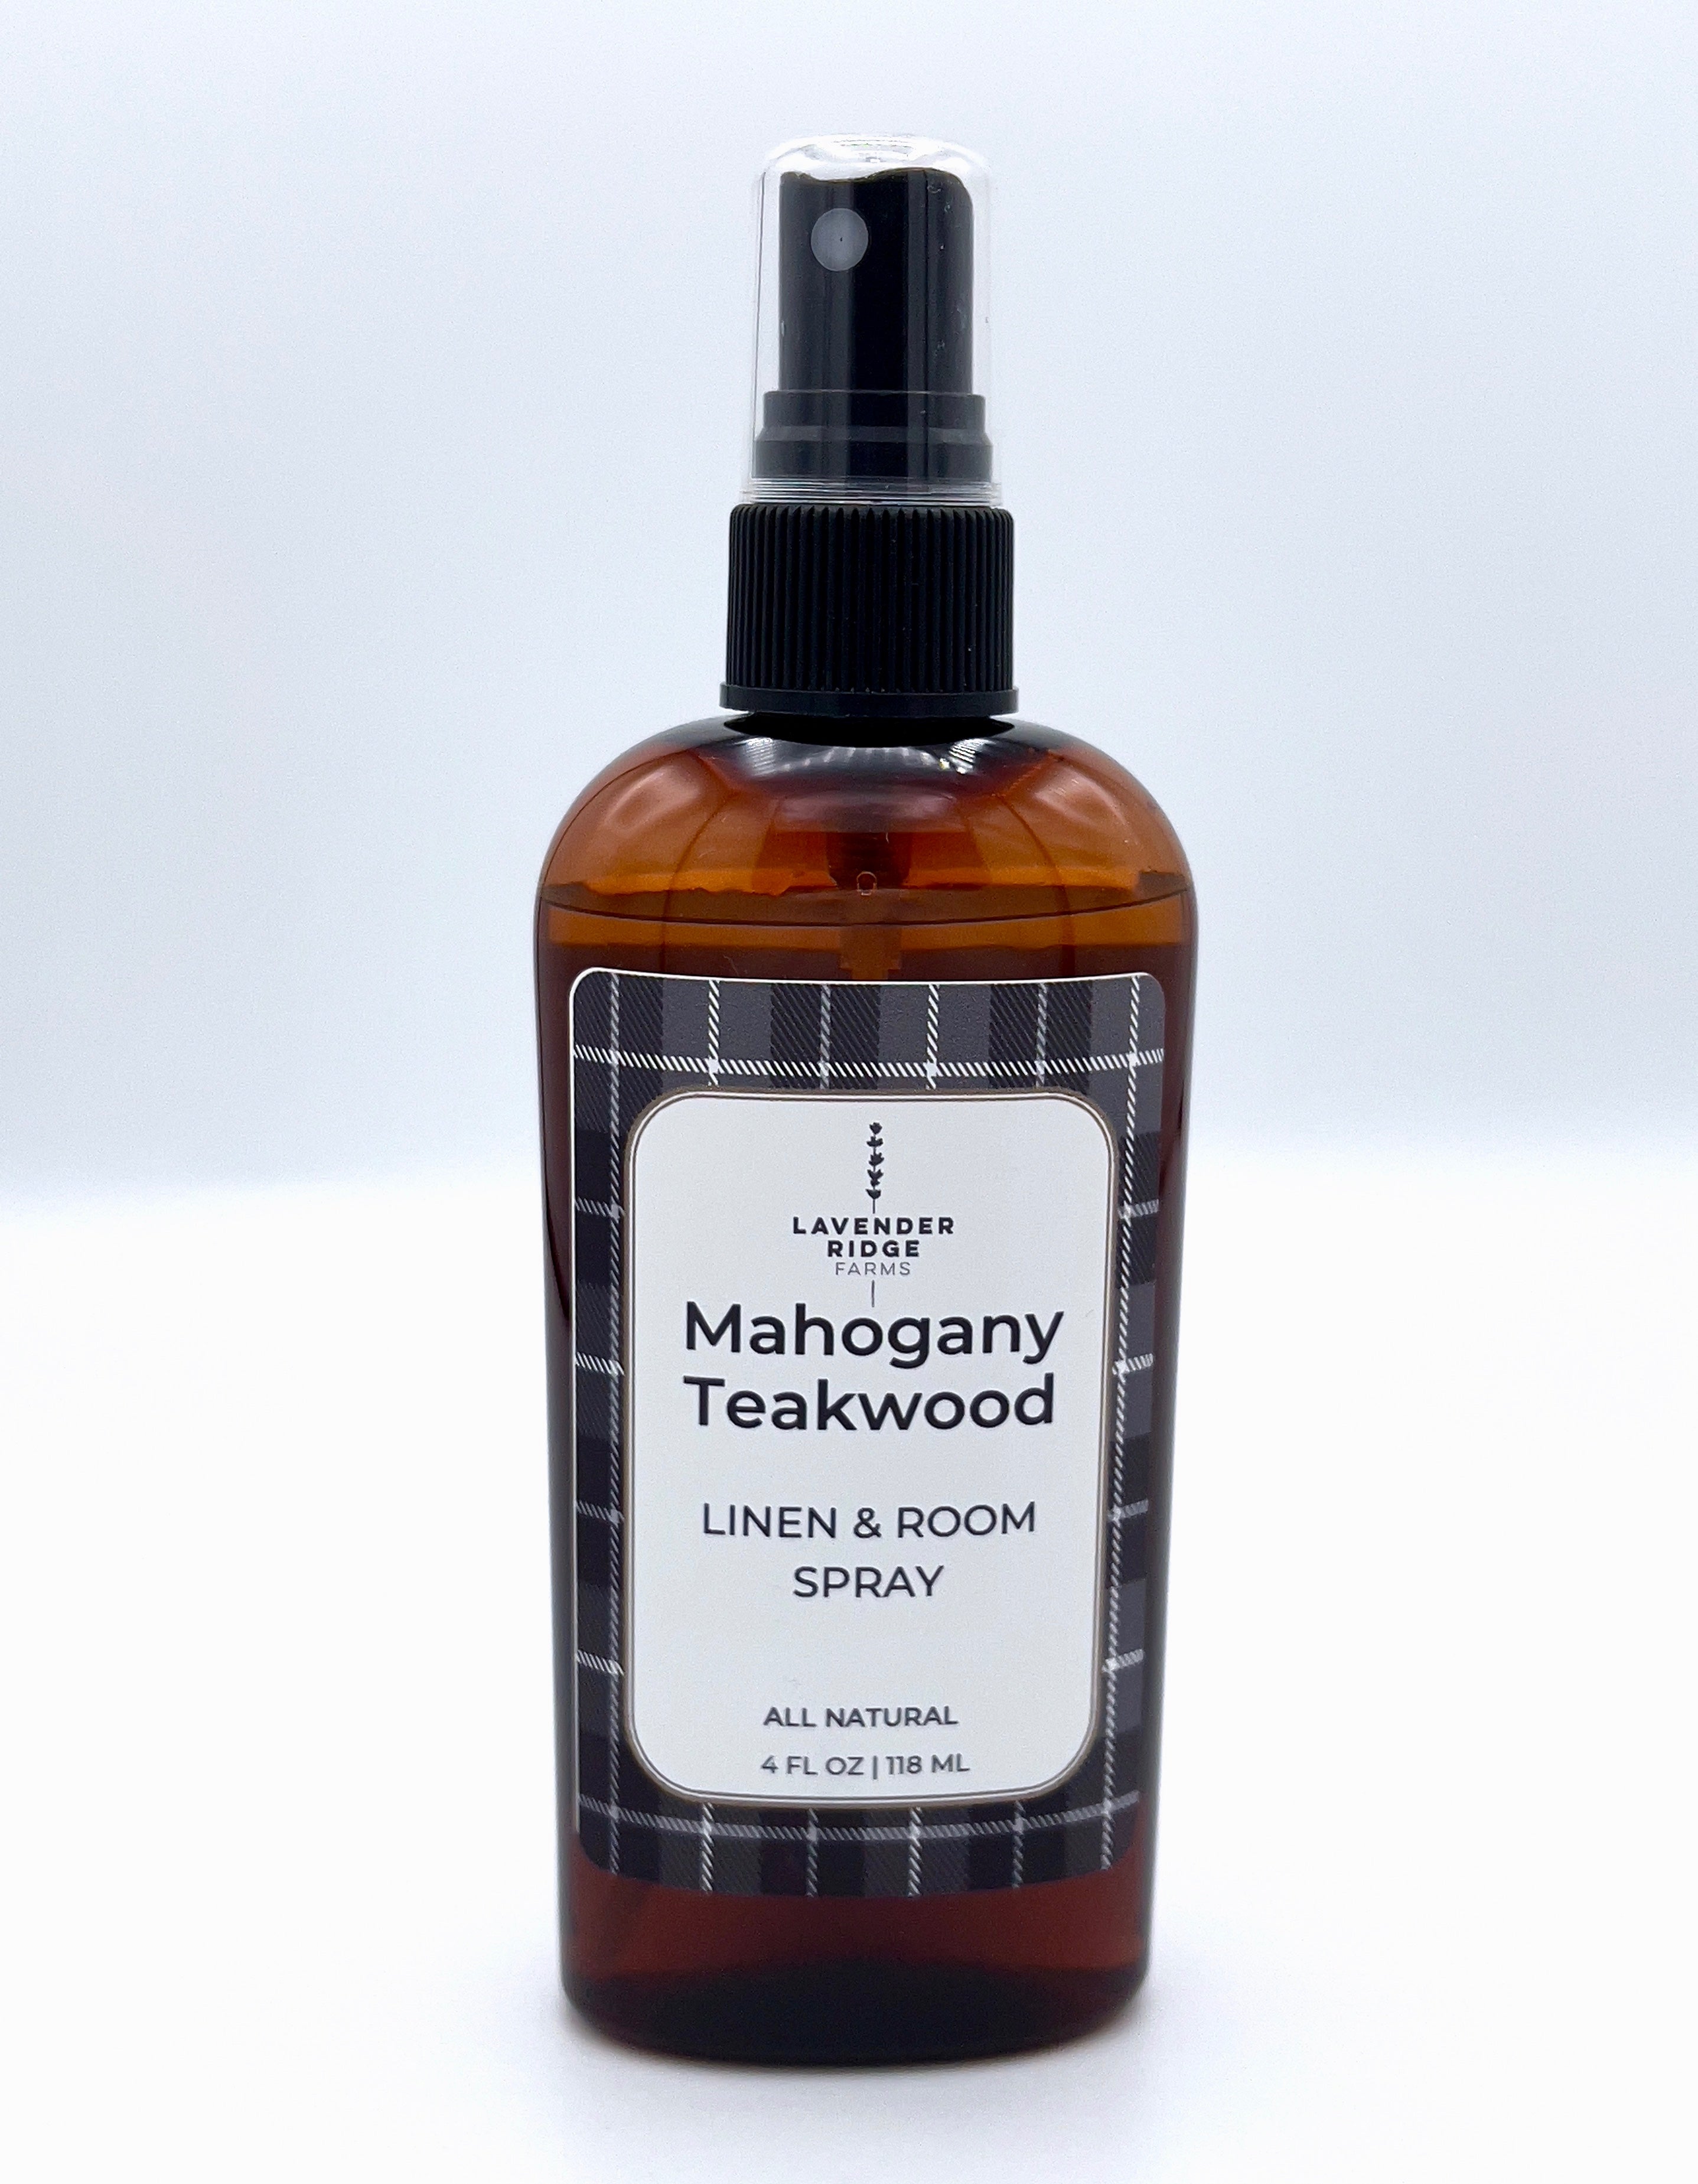 Fini's Essentials - Mahogany Teakwood Concentrated Room Spray 1.5 oz / 42.5  g A blend of Rich Mahogany, Black Teakwood, Dark Oak, Frosted Lavender.  Instantly freshen your home with two quick bursts